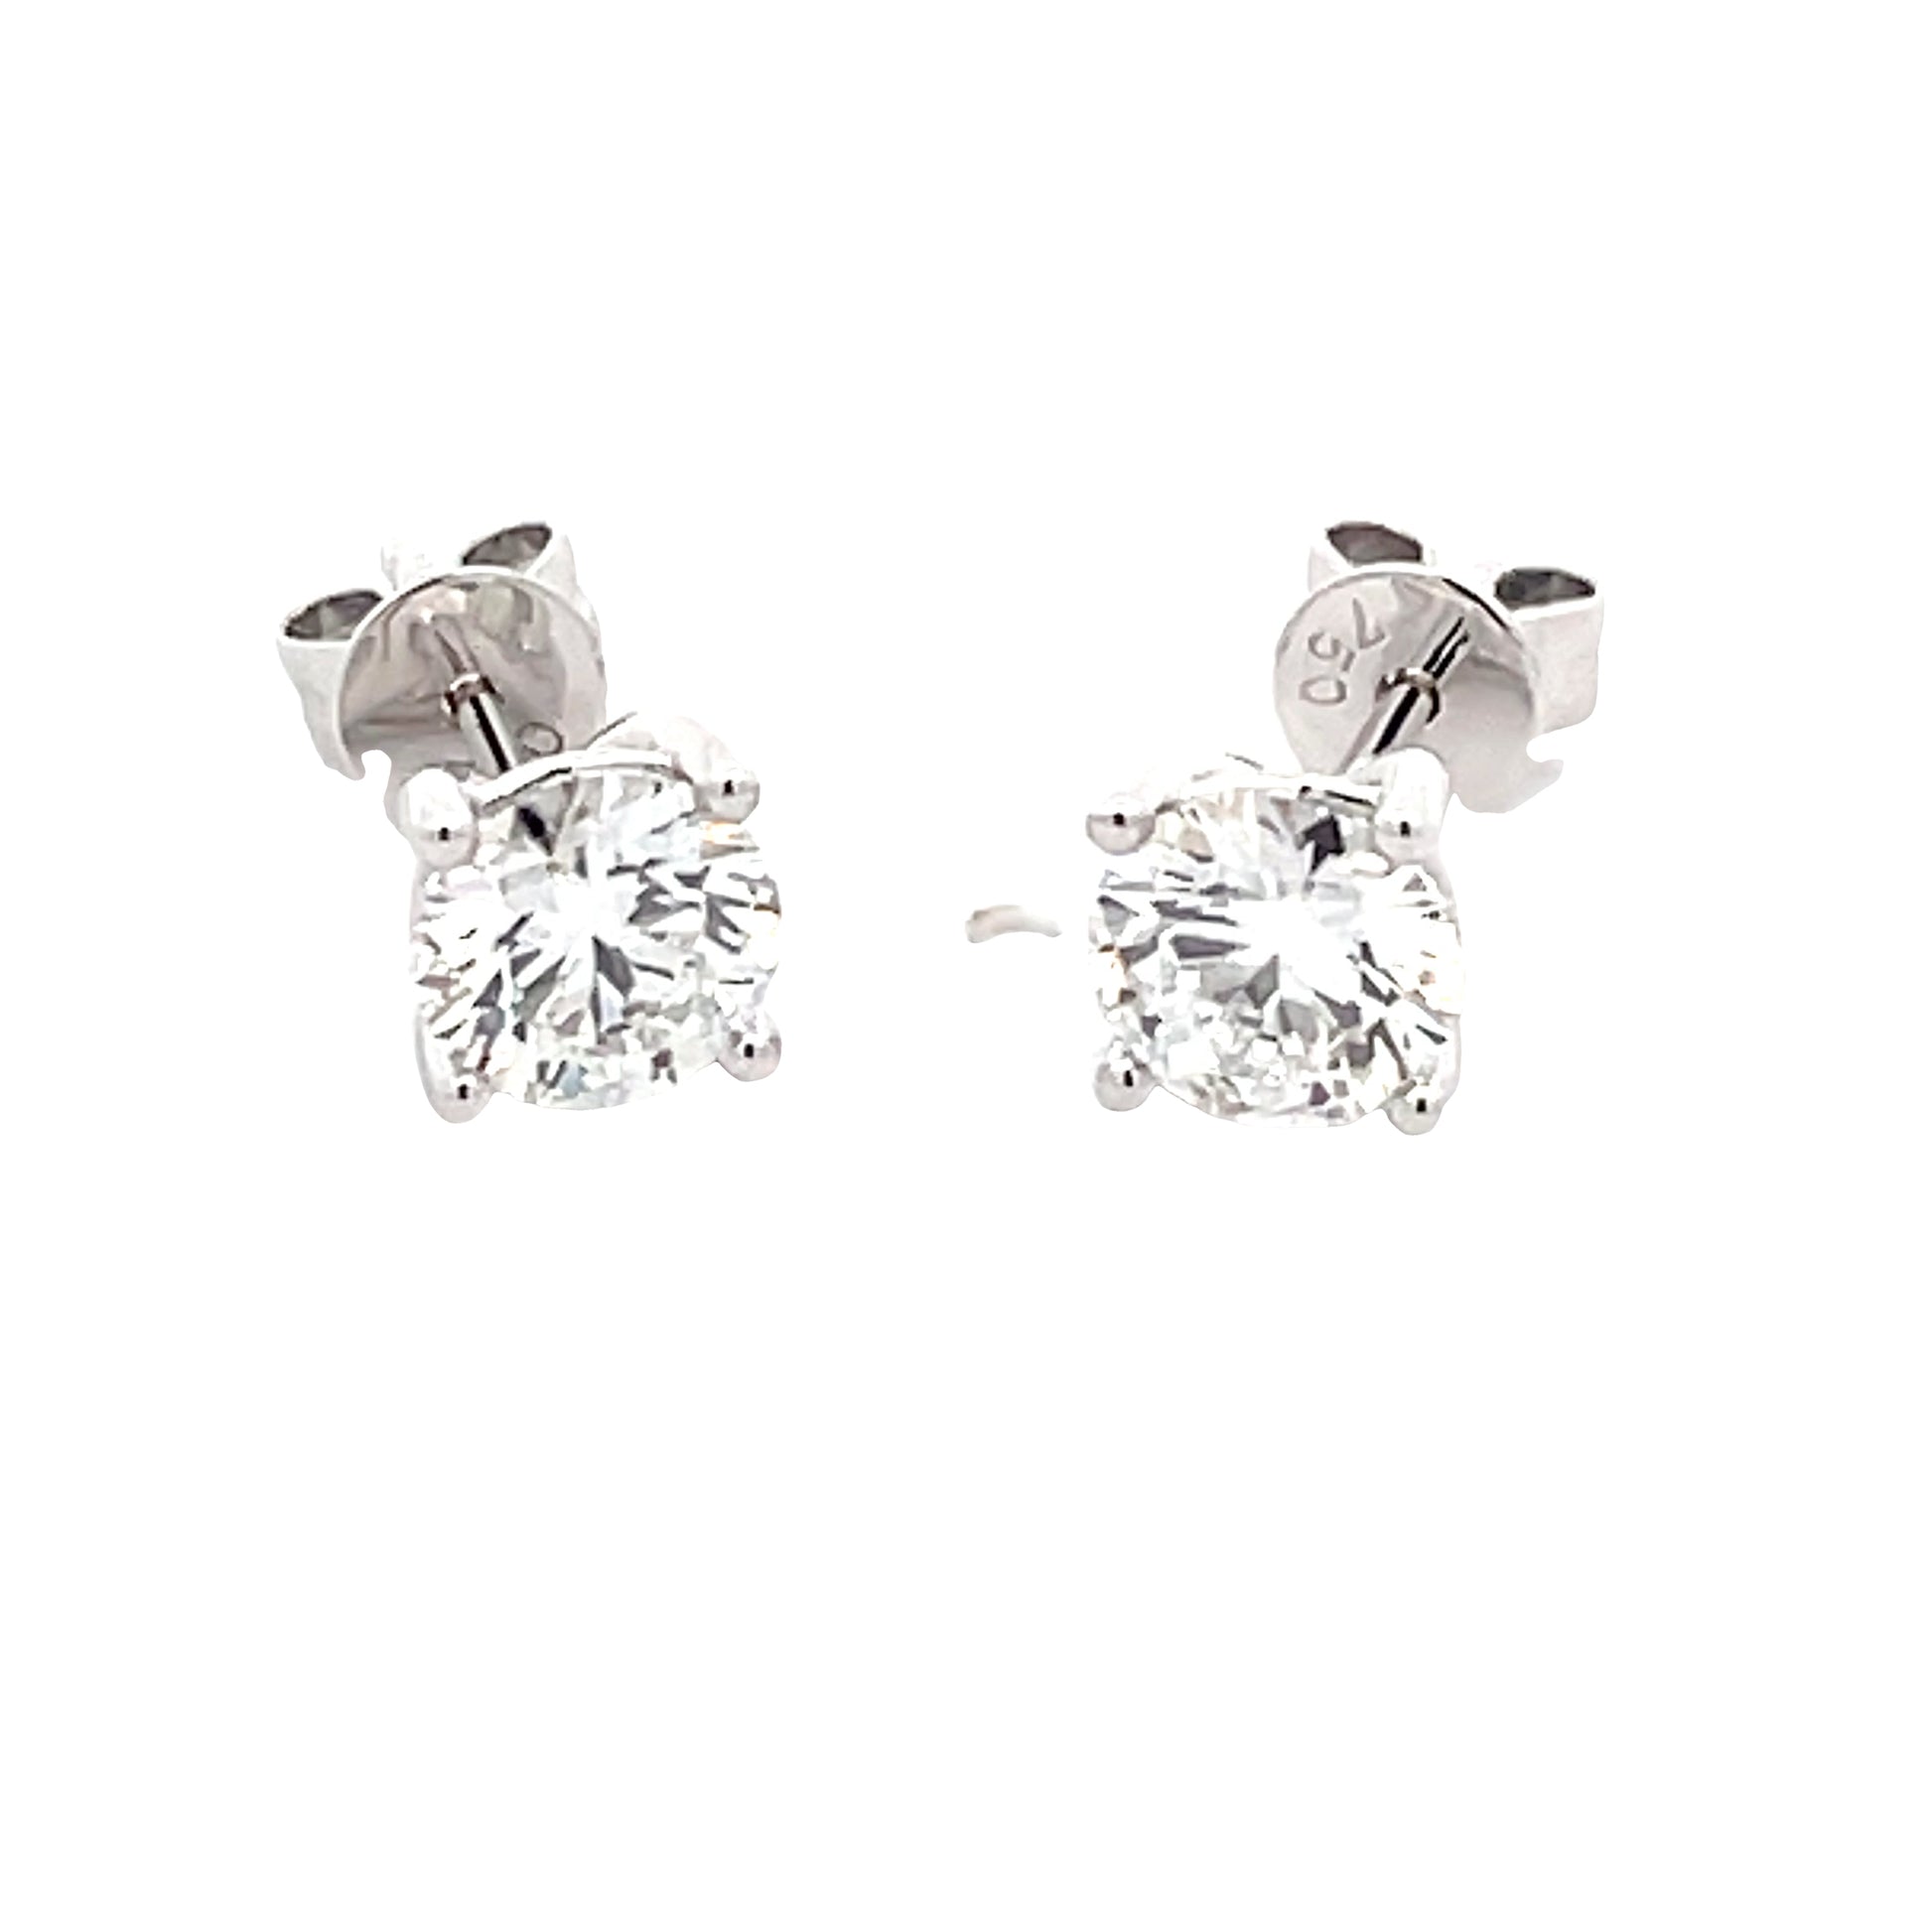 Lab Grown Round Brilliant Cut Diamond Solitaire Earrings - 1.41cts  Gardiner Brothers   